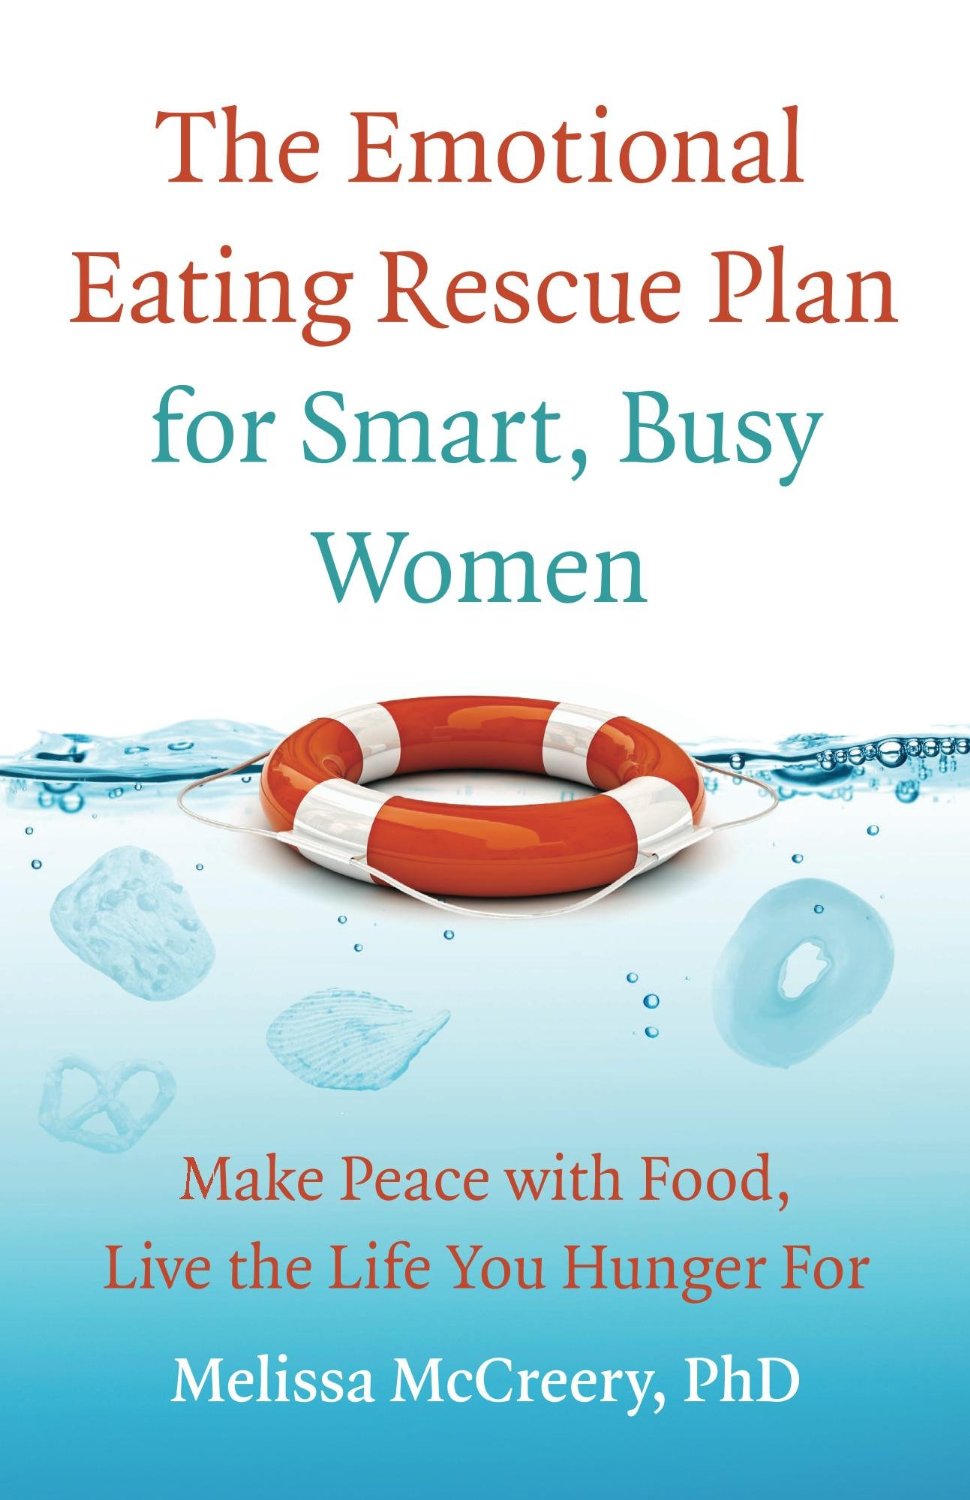 The Emotional Eating Rescue Plan for Smart, Busy Women by Melissa McCreery